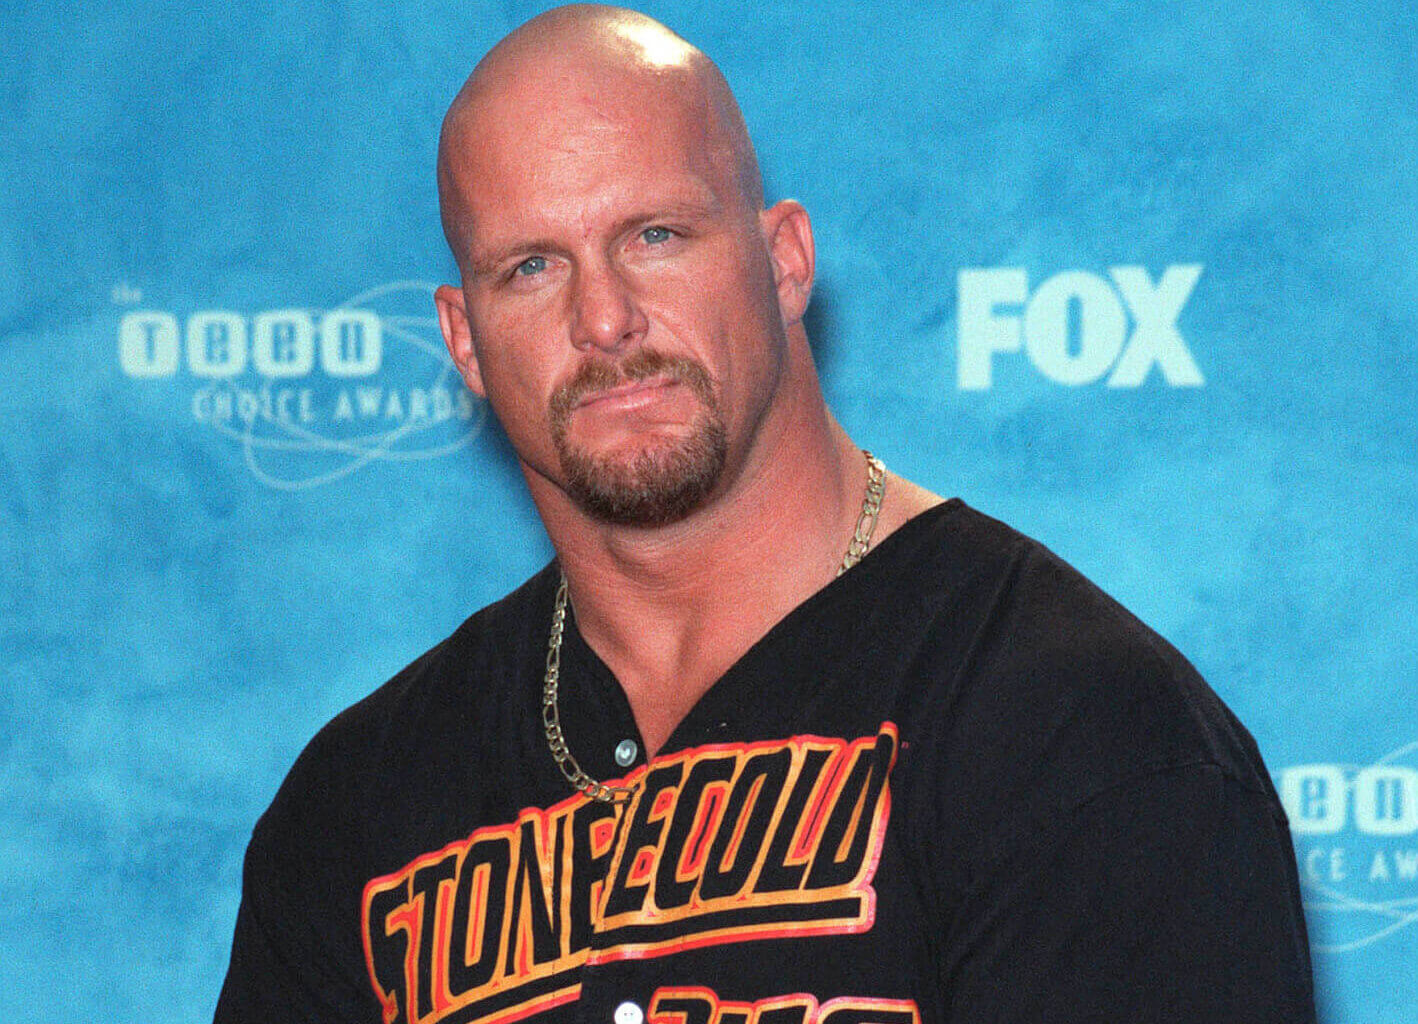 Steve Austin at the 1999 Teen Choice Awards (Photo by Featureflash Photo Agency on Shutterstock)